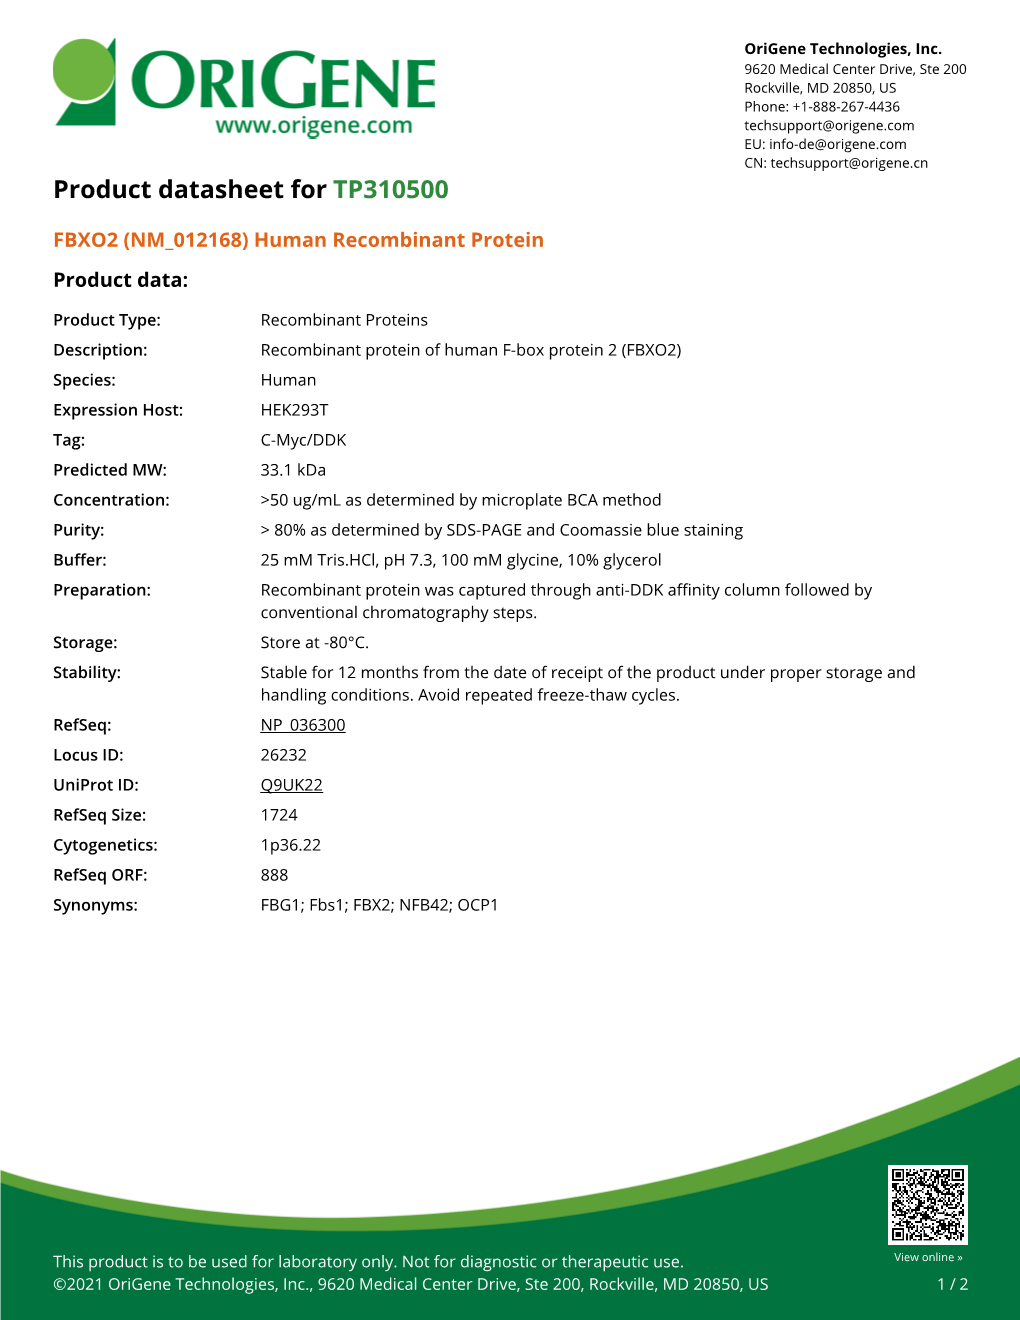 FBXO2 (NM 012168) Human Recombinant Protein Product Data